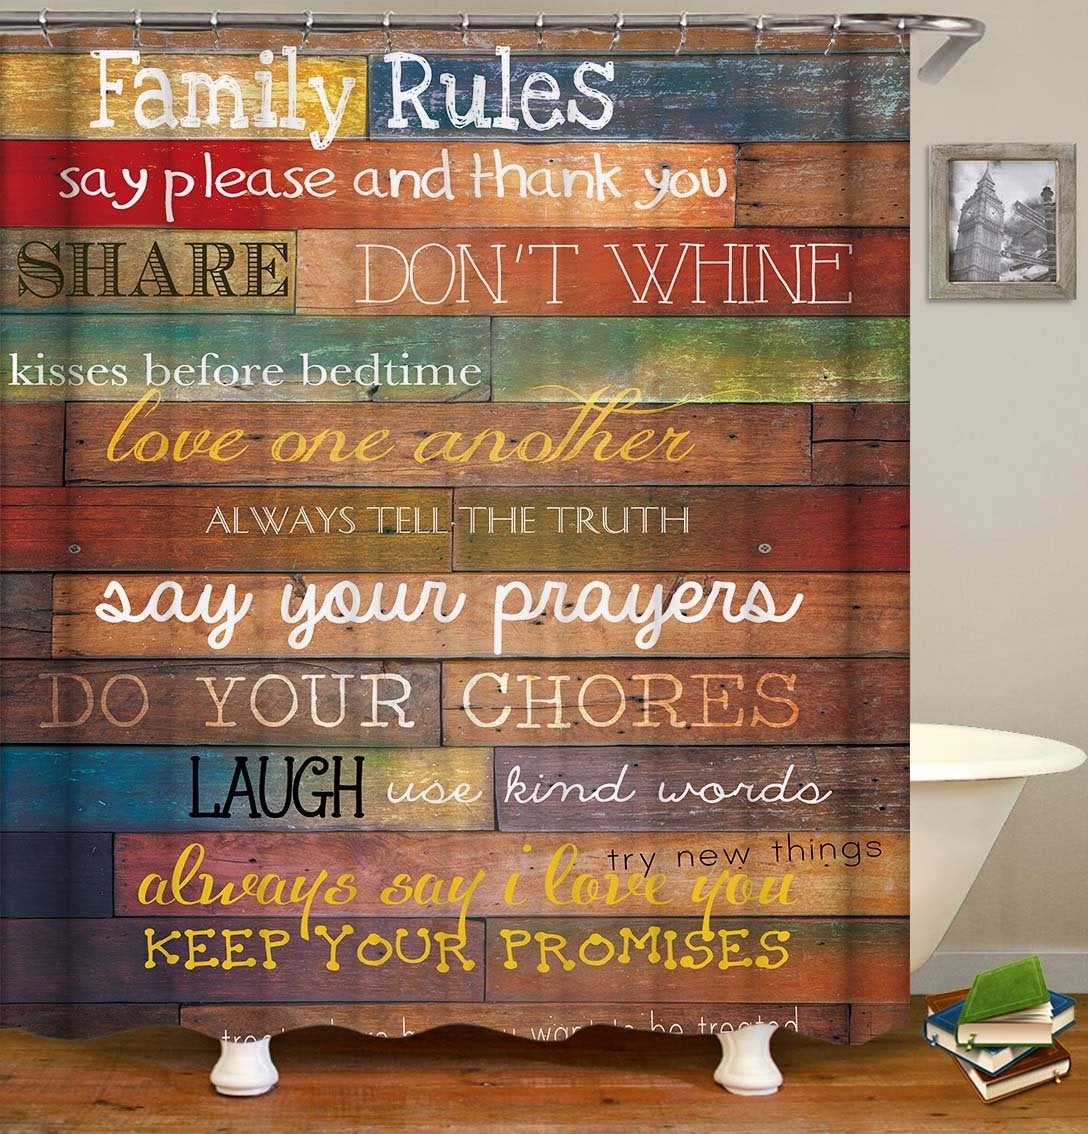 Family Rules Wooden Deck Shower Curtain